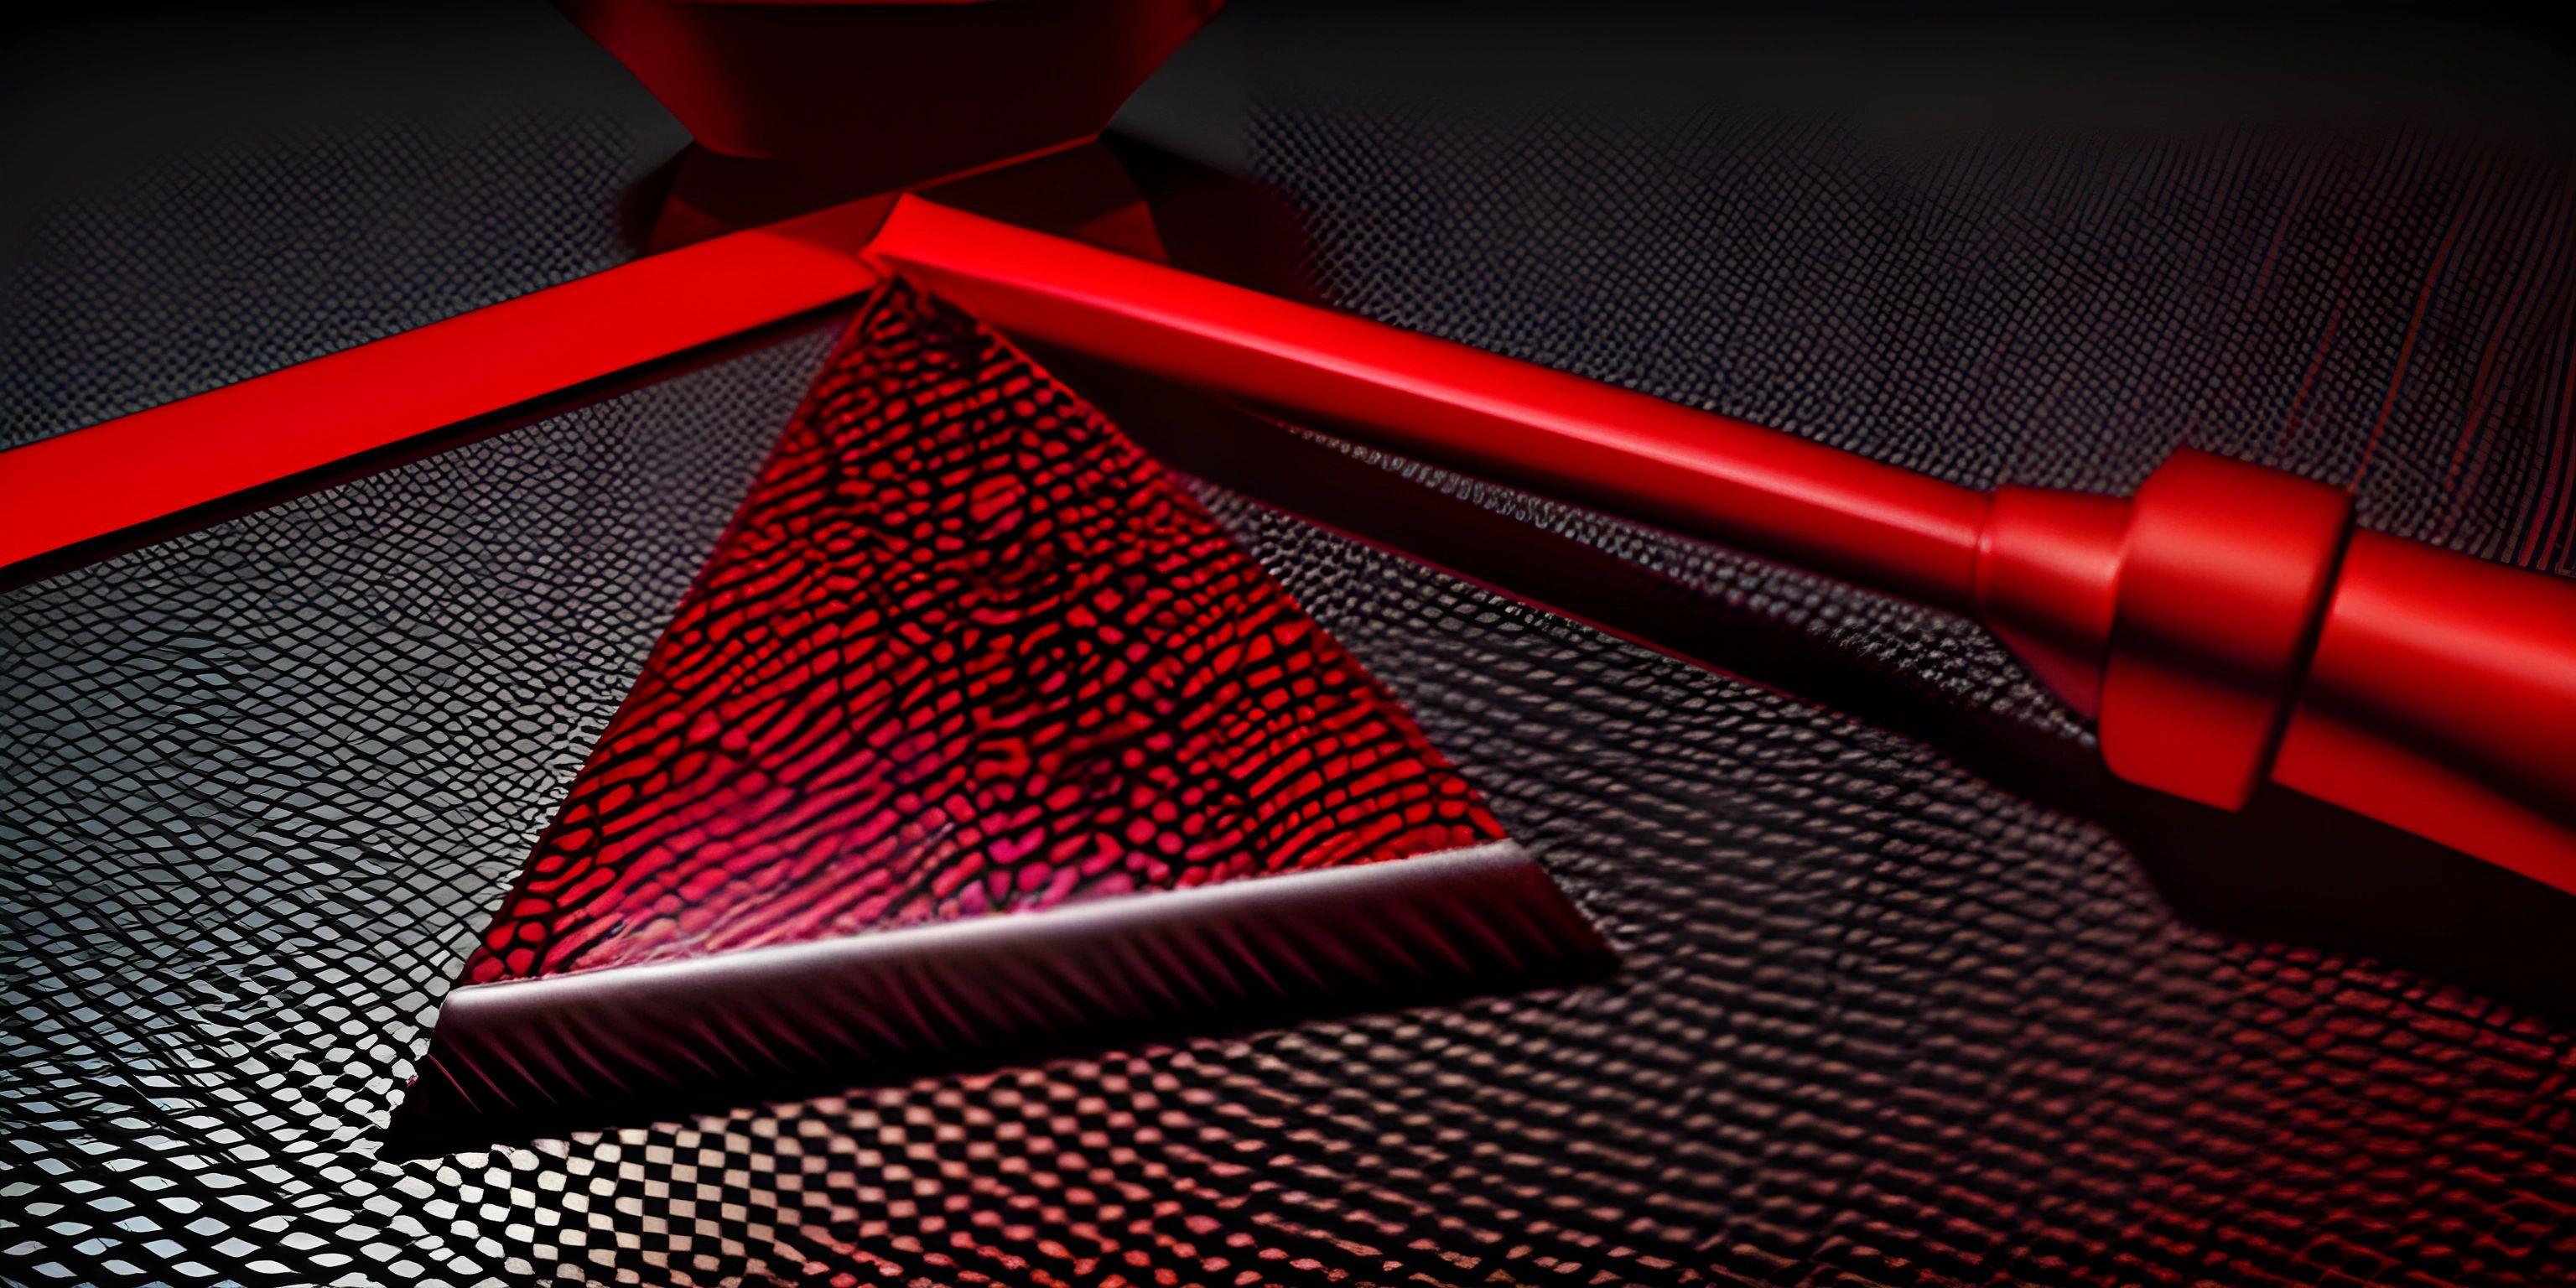 red tie sits on top of a black surface with a red handle next to it